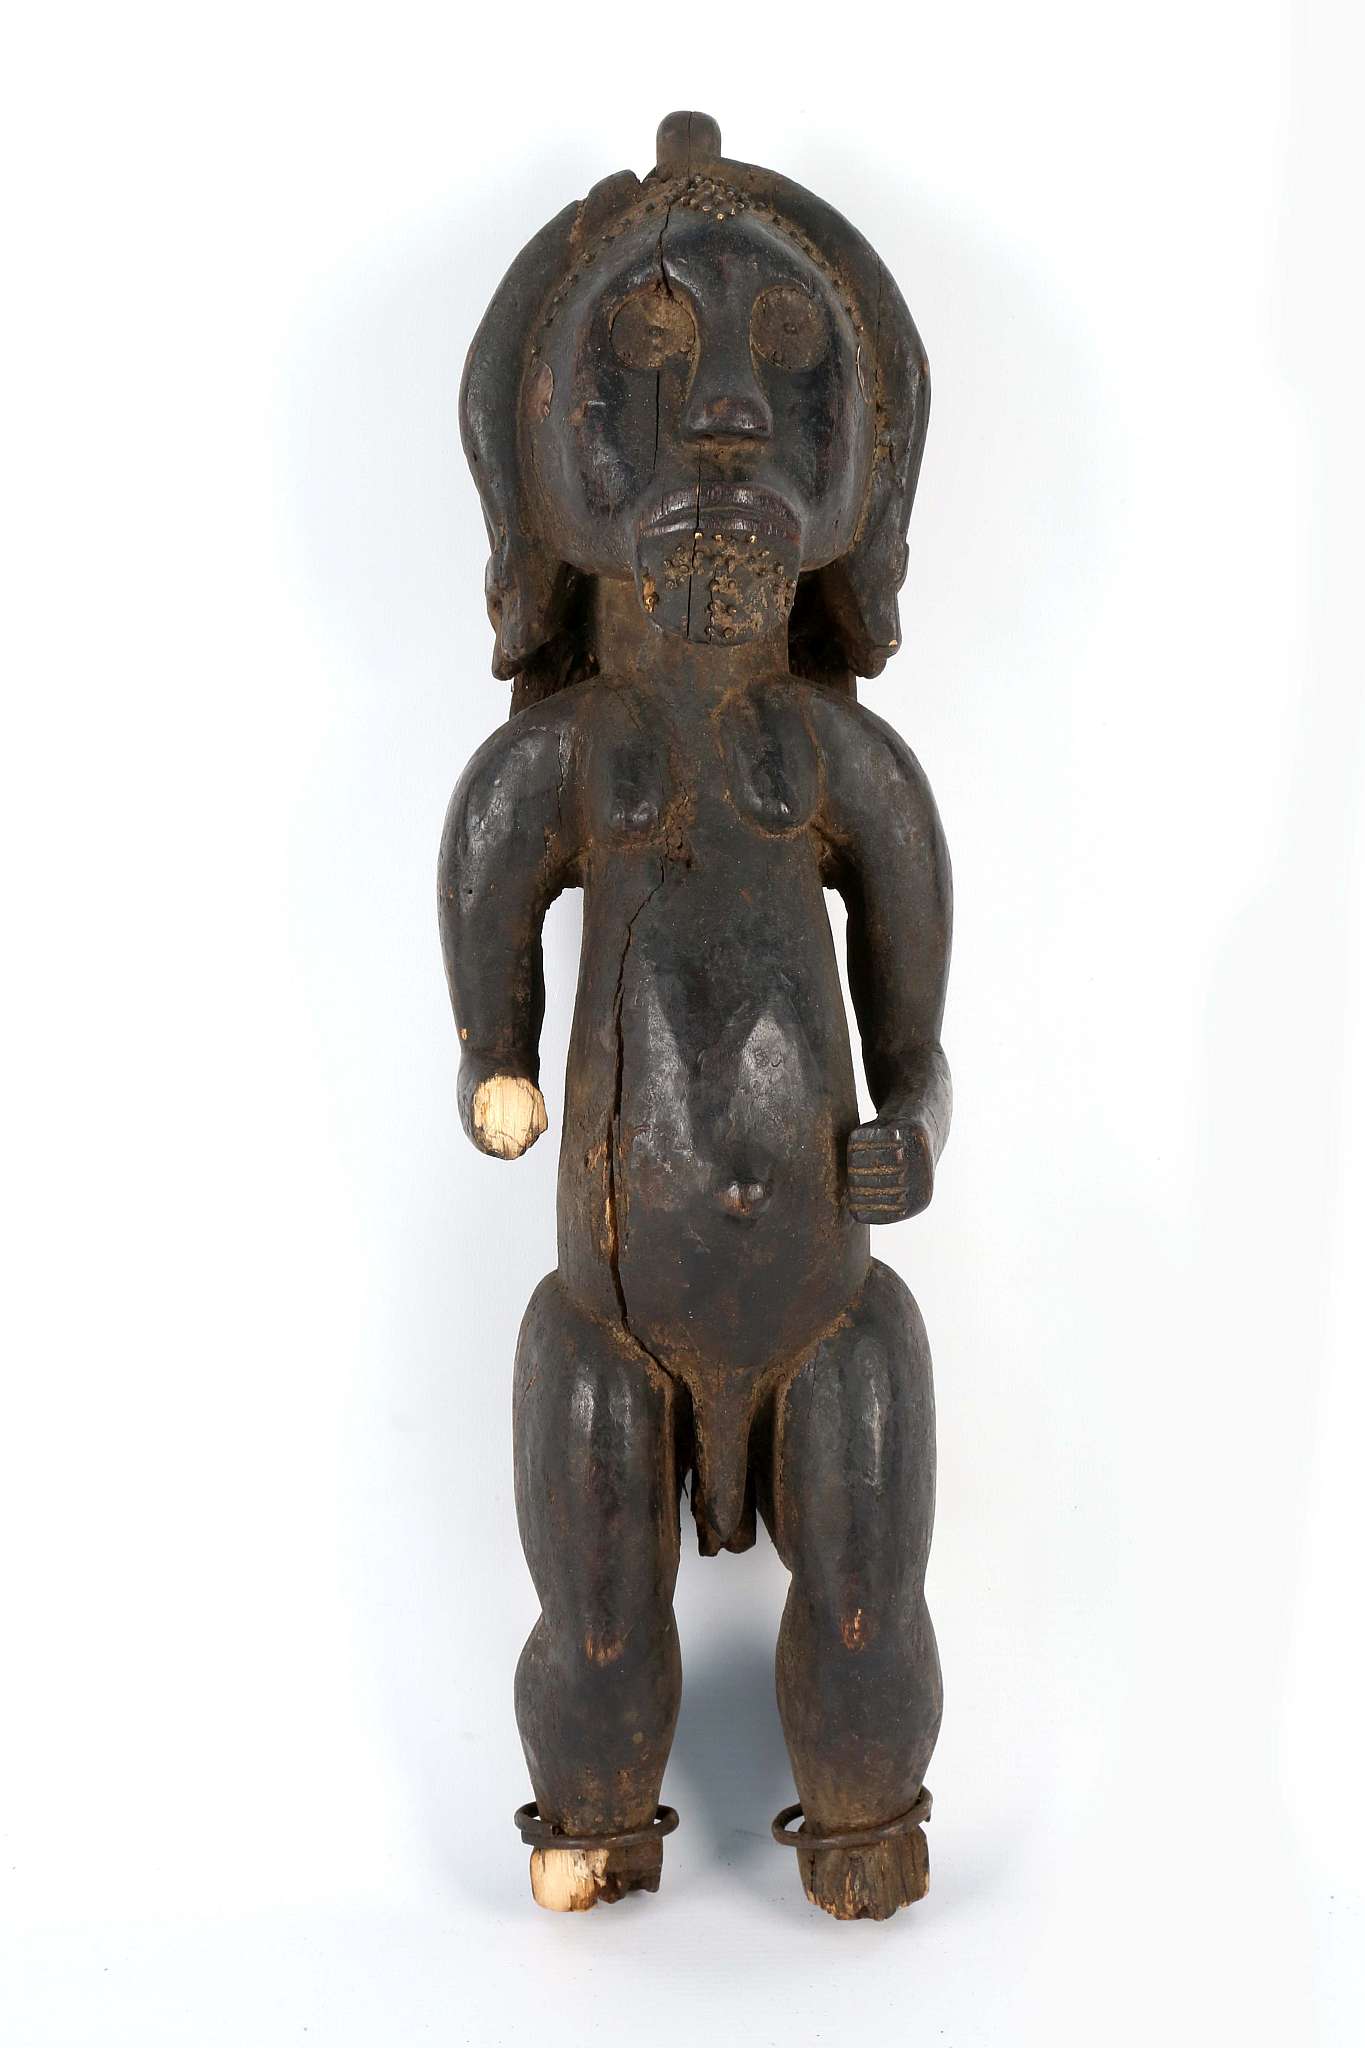 A FANG STANDING MALE FIGURE, GABON With brass disc insets for the eyes, beard and long hair in